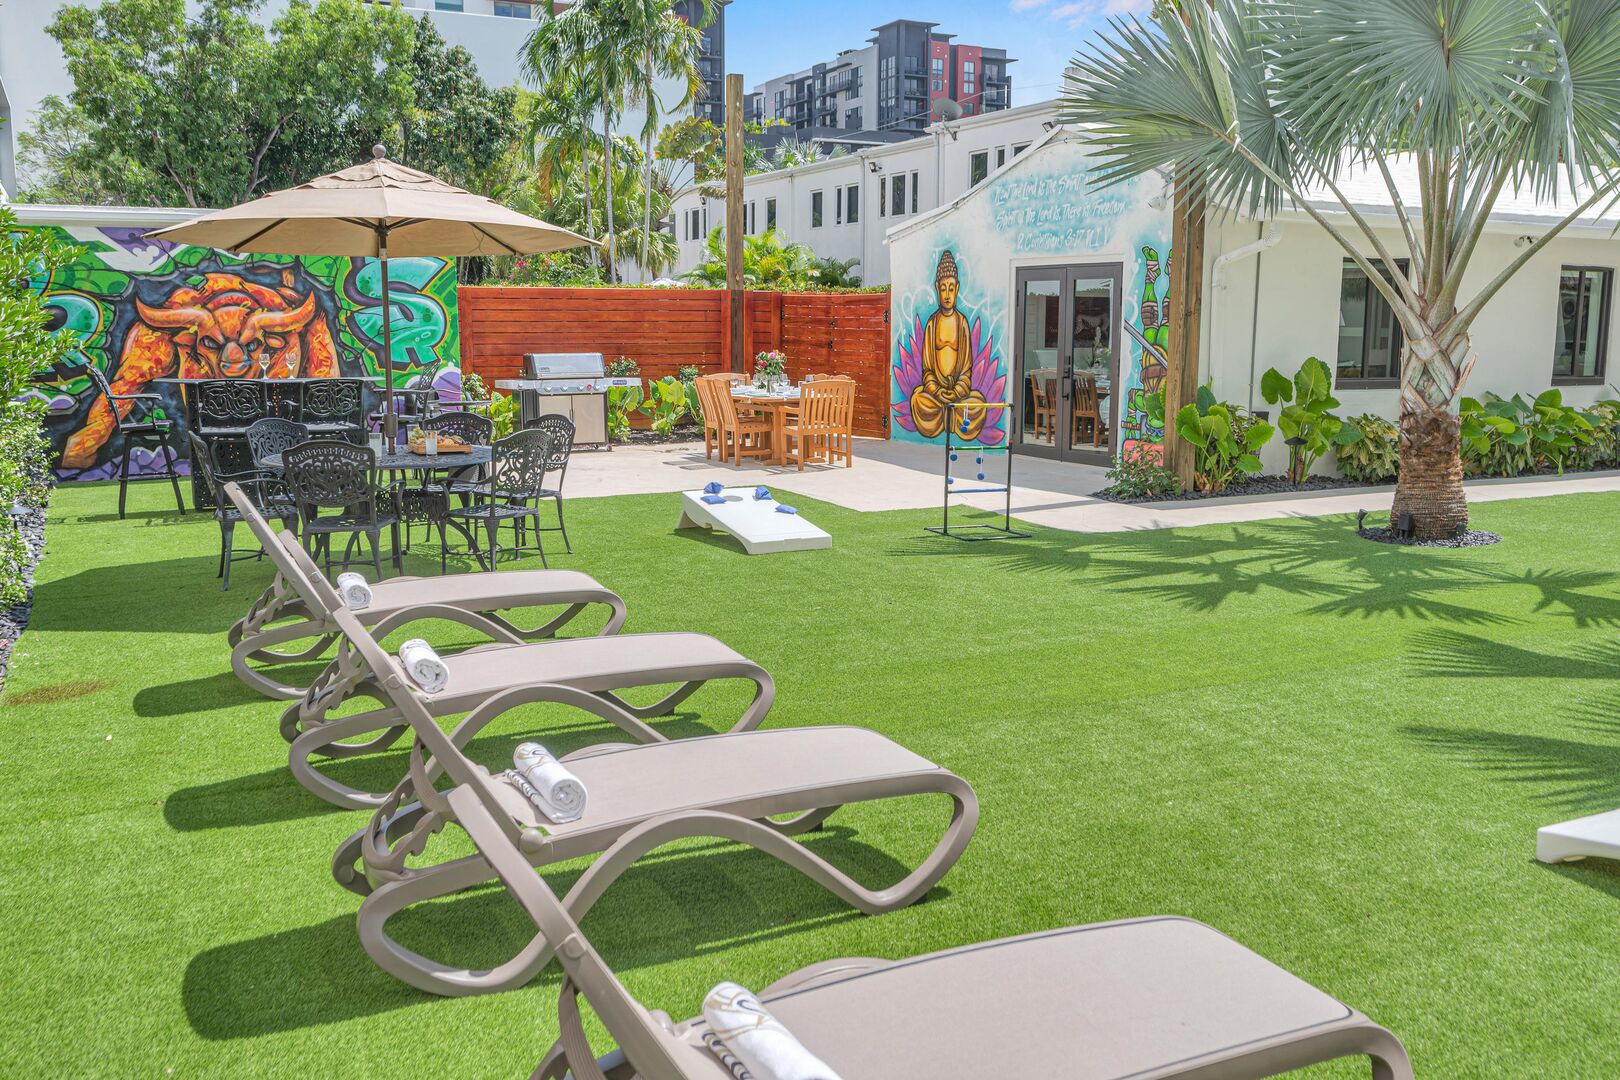 There are lounge chairs, an outdoor bar area, yard games, and a seating area by the grill!